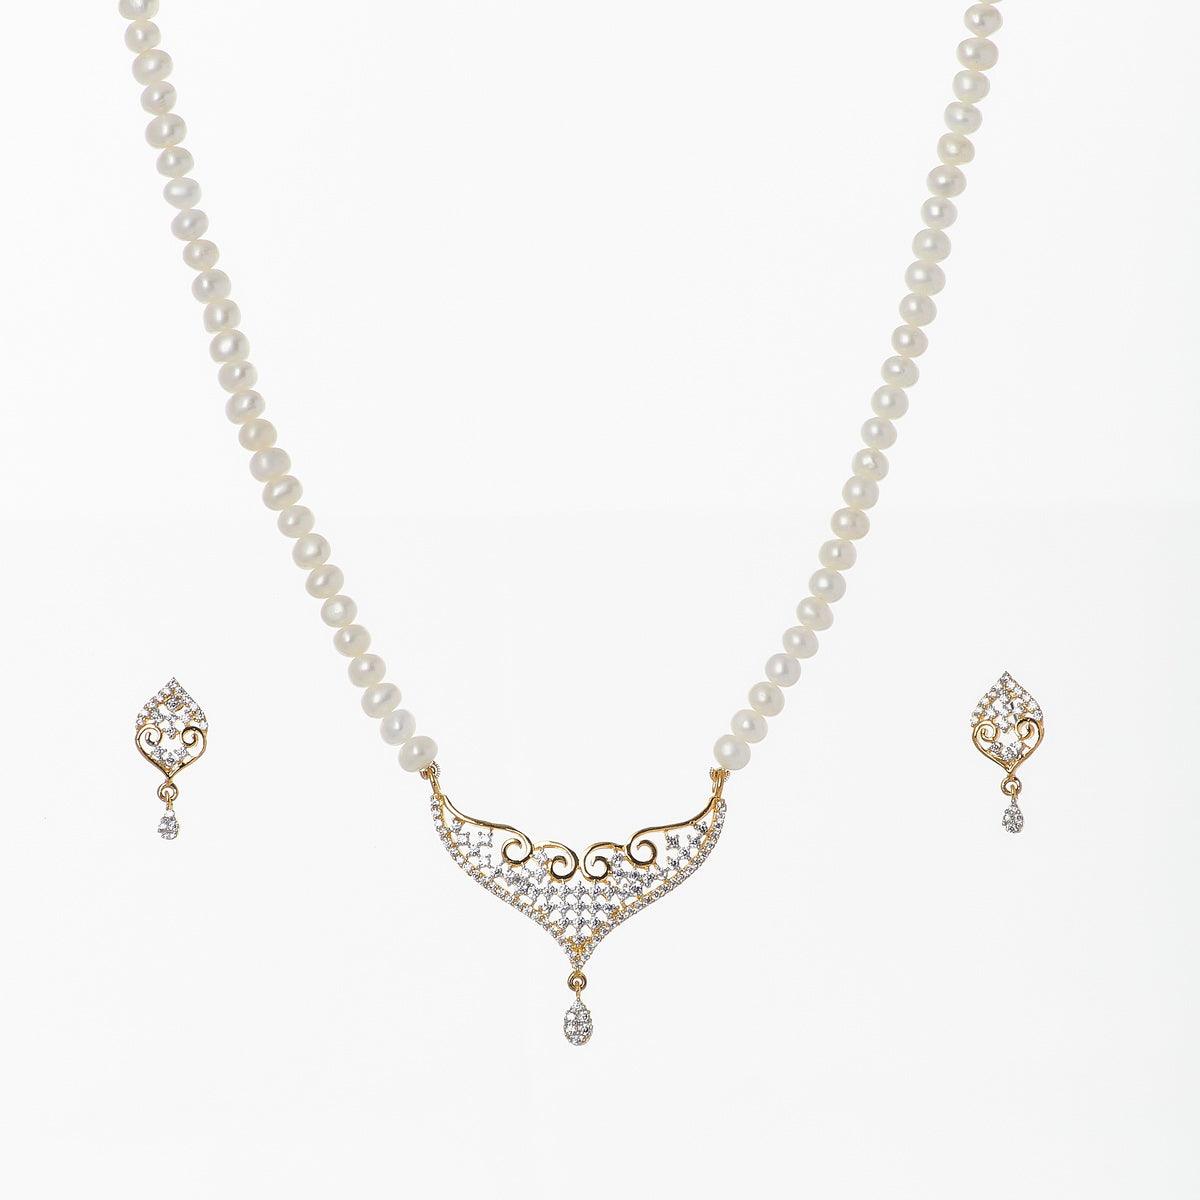 Mangalsutra Design Pearl Necklace Set - Chandrani Pearls